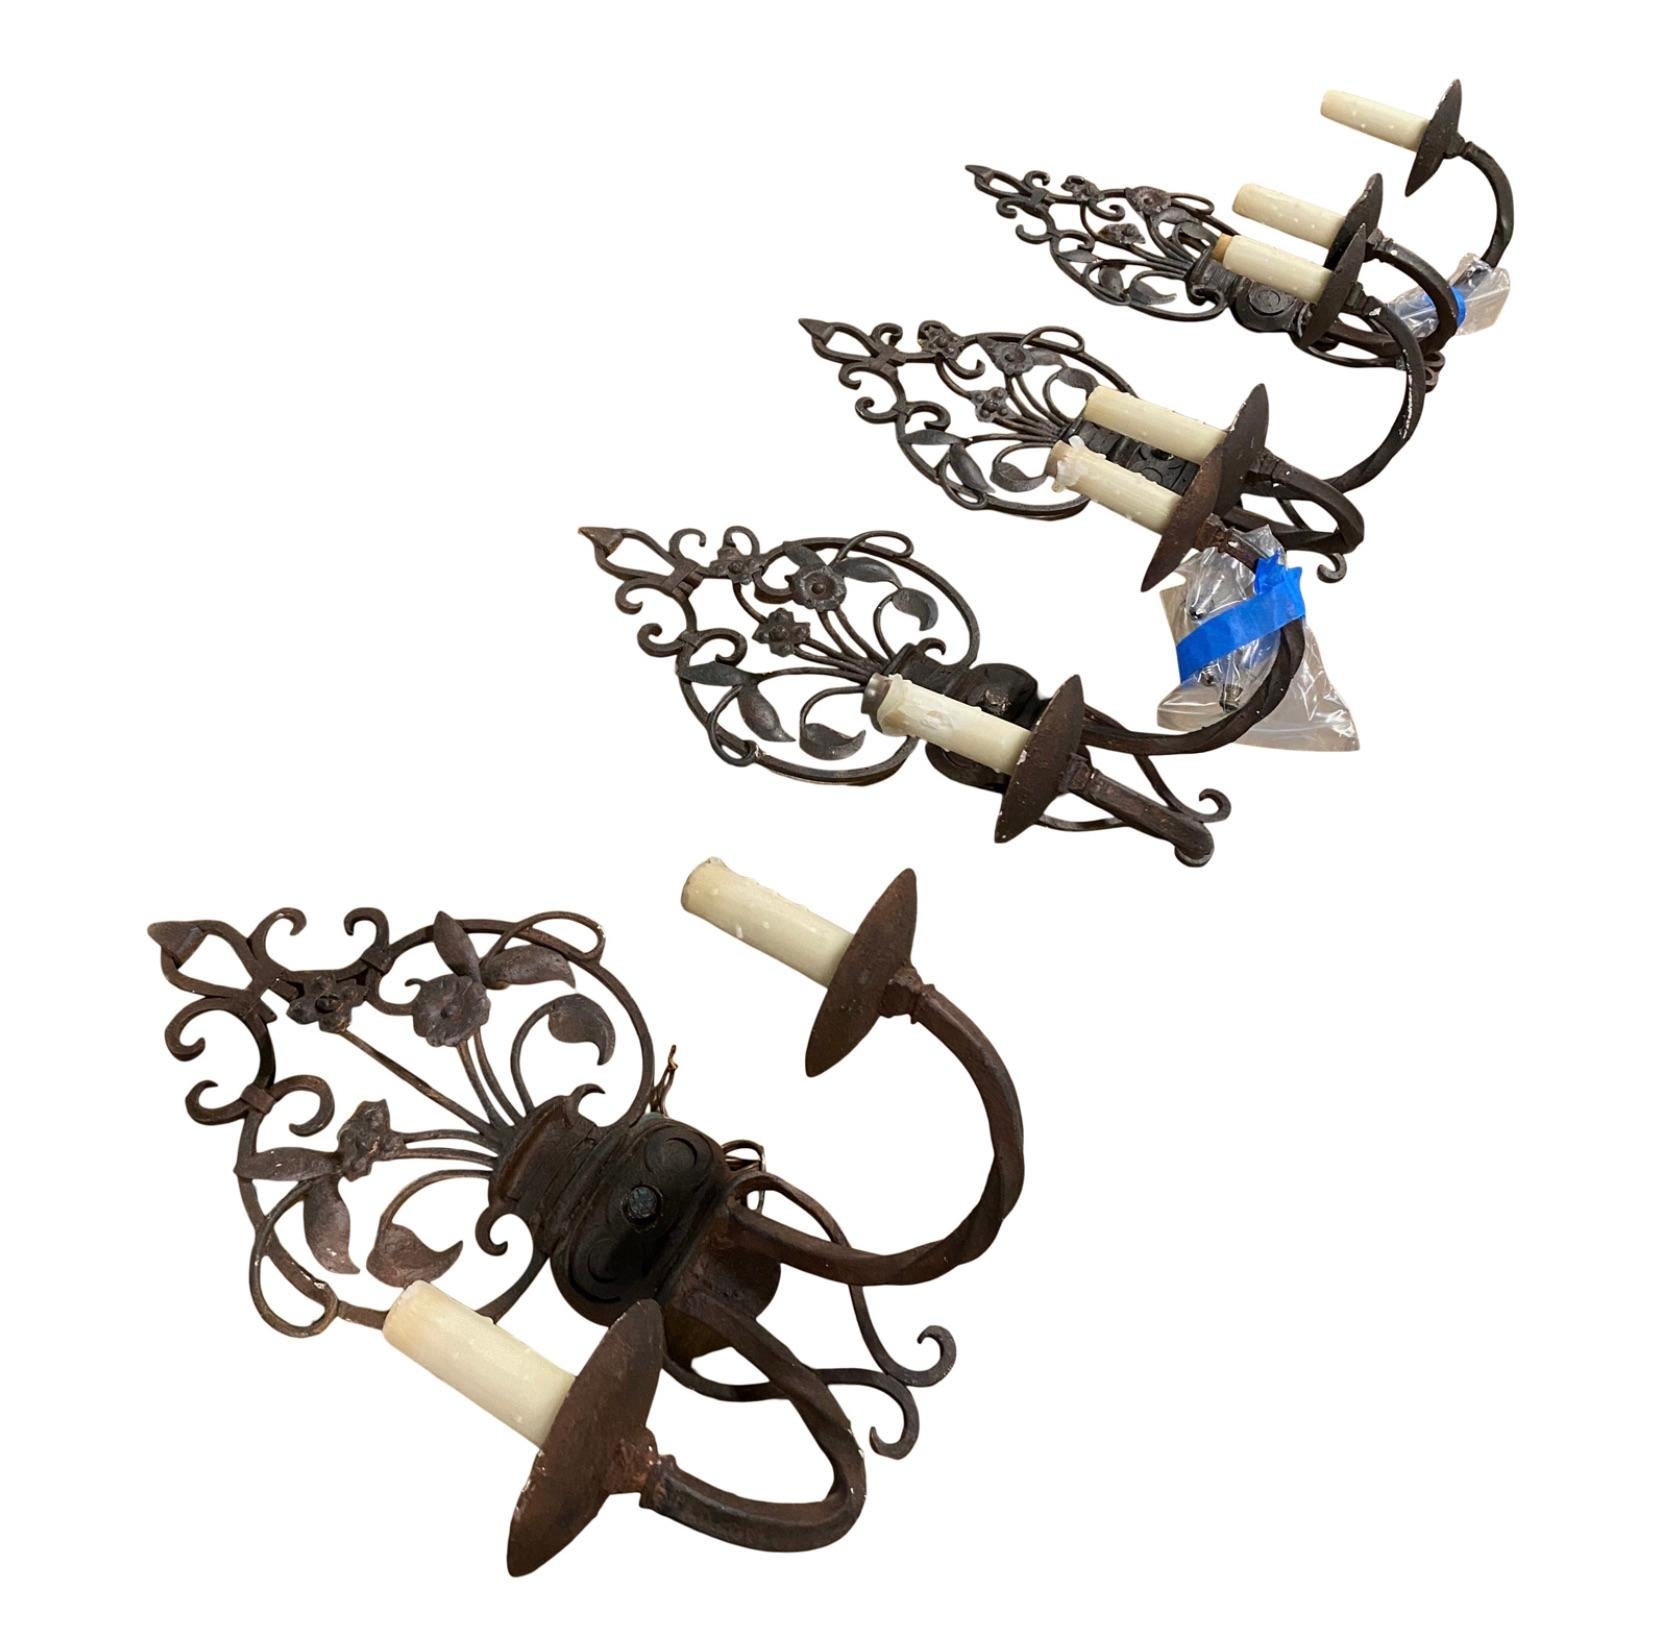 Antique French Wrought Iron Sconces

Four available.

$2,800 for all four or $700 each.

19″H x 12 1/2″W x 7 1/2″D